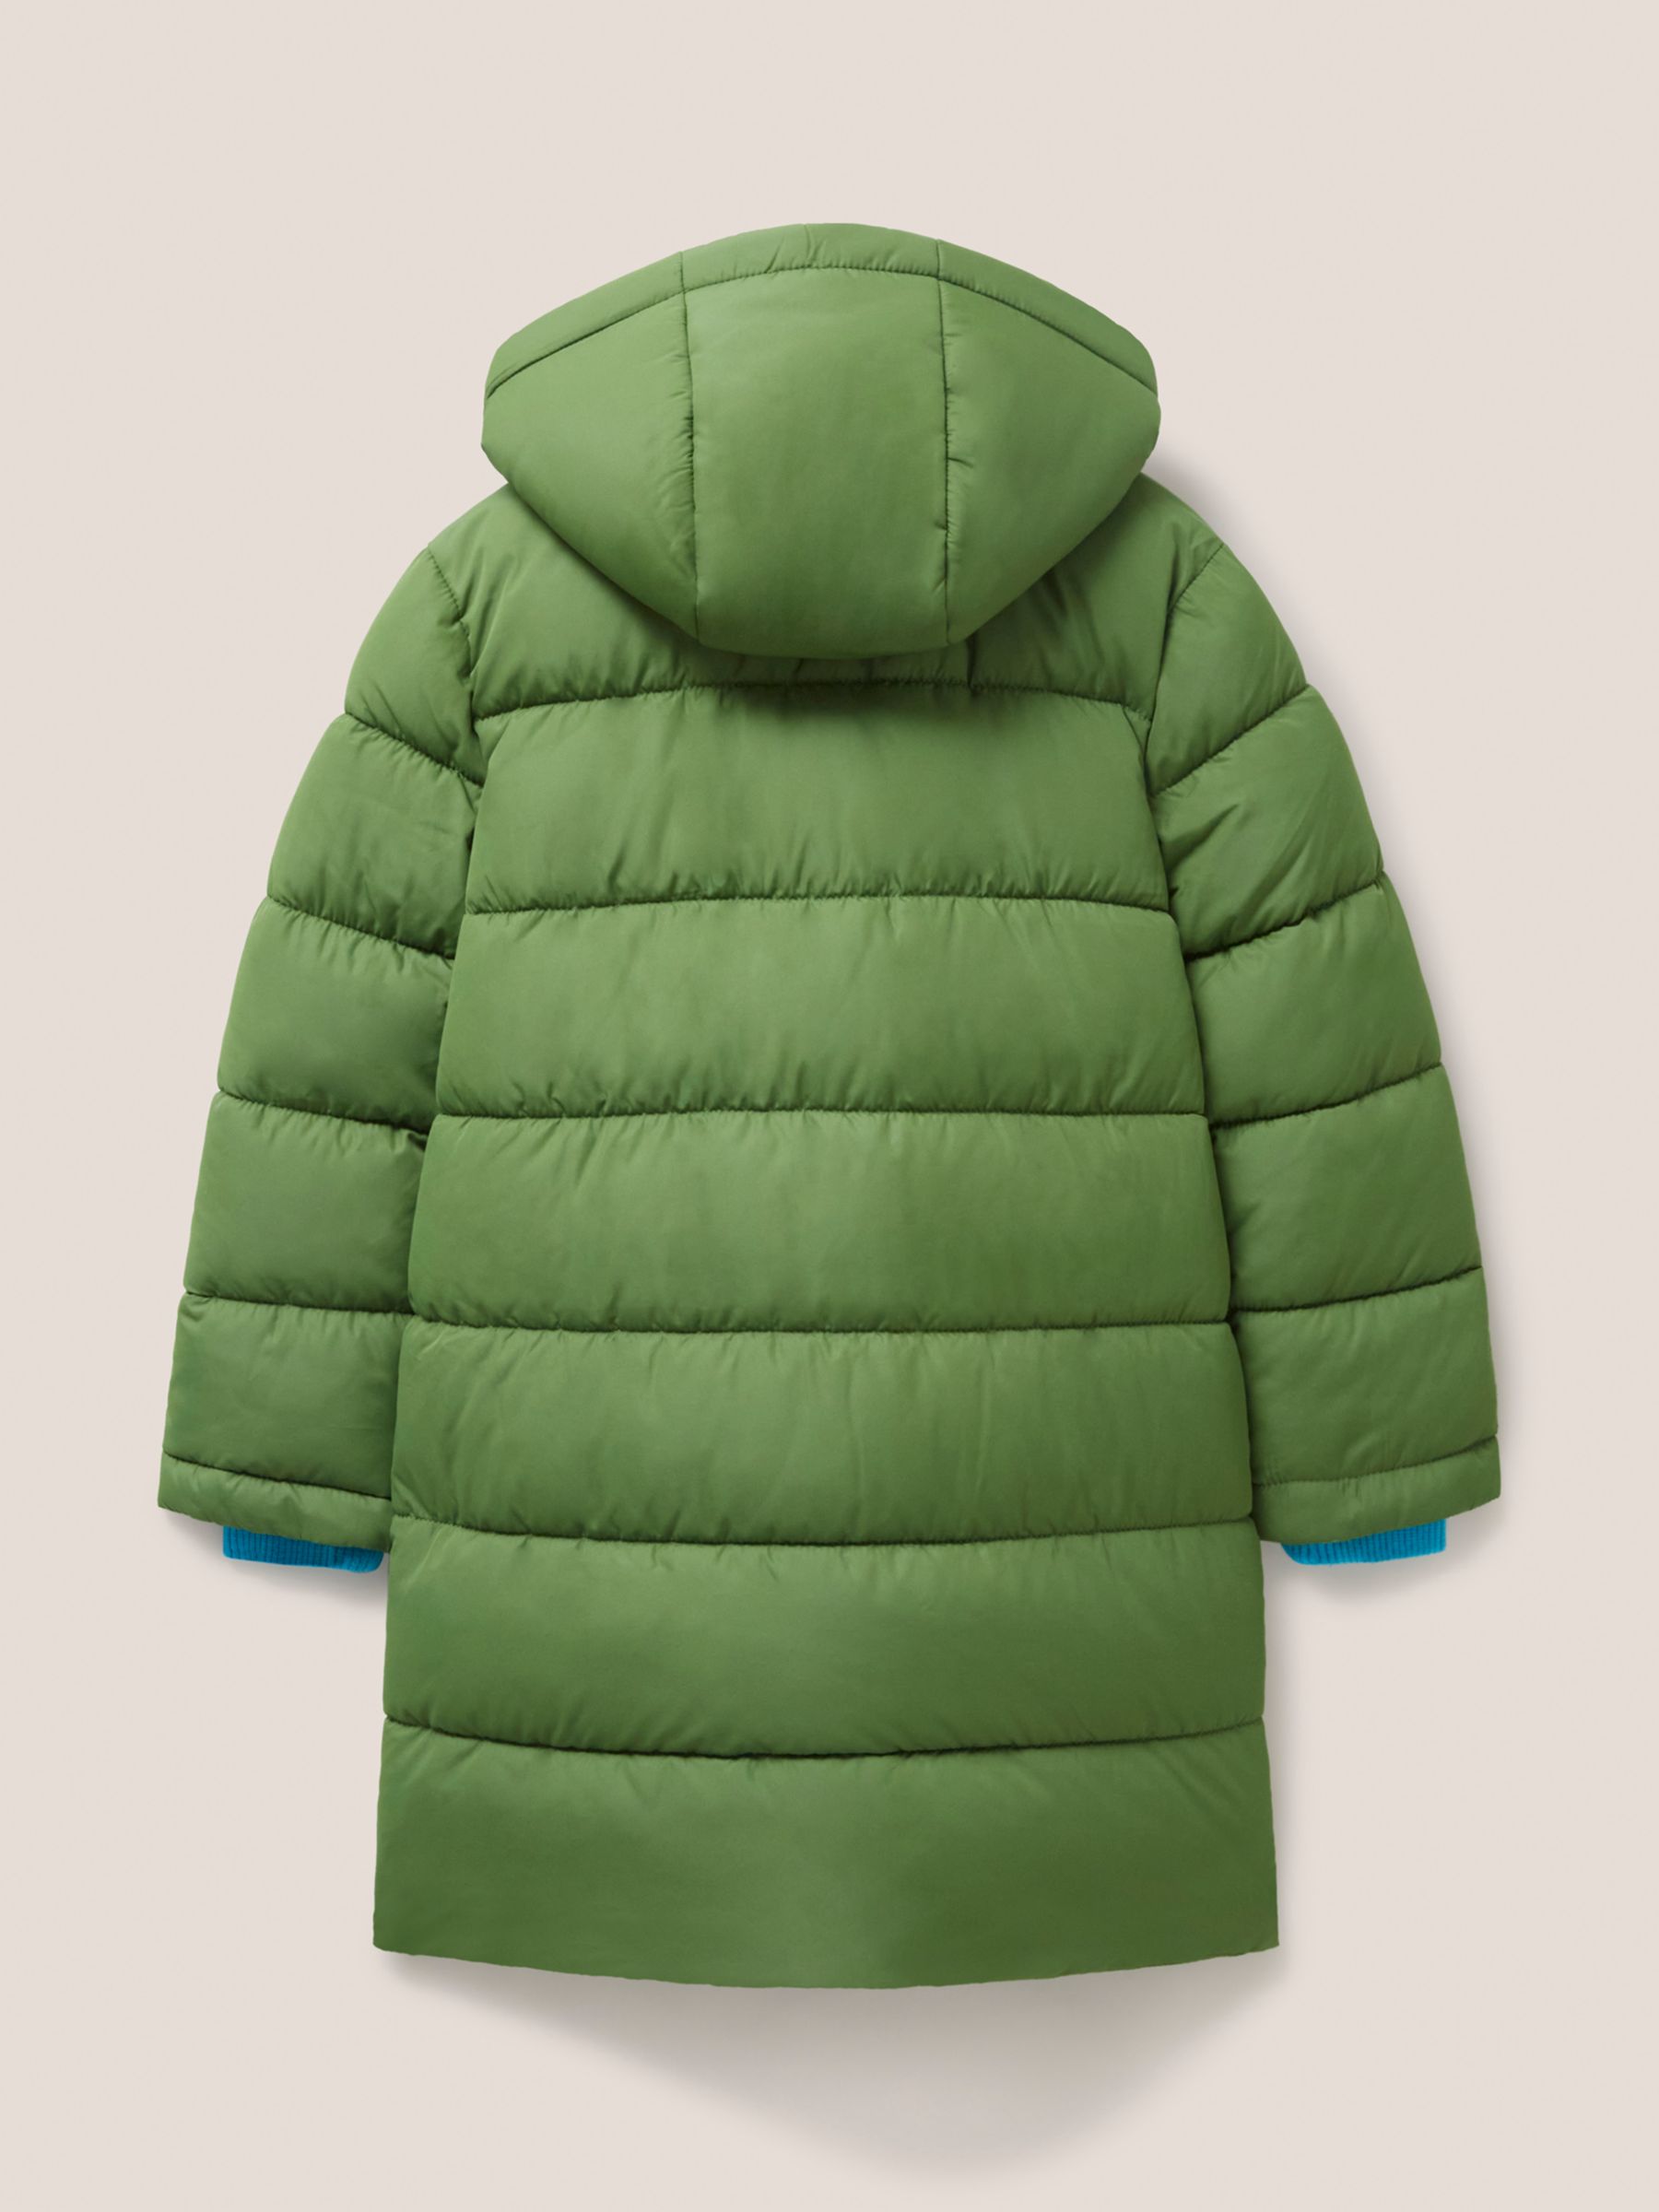 White Stuff Kids' Longline Quilted Hooded Puffer Jacket, Mid Teal at ...